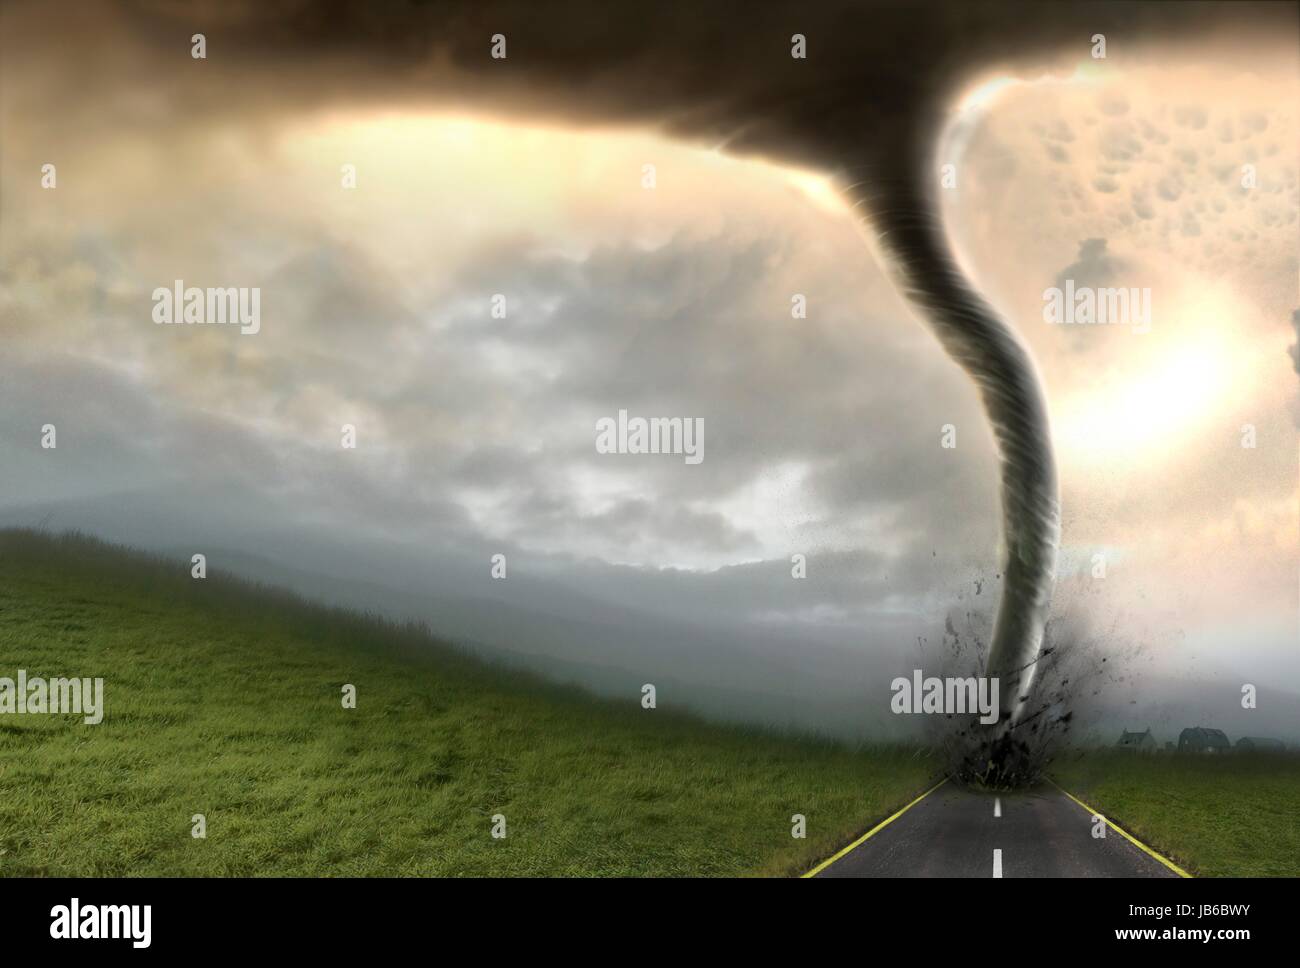 Tornado, artwork. At the base of the tornado is a debris cloud. A tornado is a violent rotating column of air characterised by a funnel-shaped cloud that forms within thunderstorms. They can measure up to 100 metres in diameter, contain winds moving at over 500 kilometres an hour, and cause widespread devastation Stock Photo